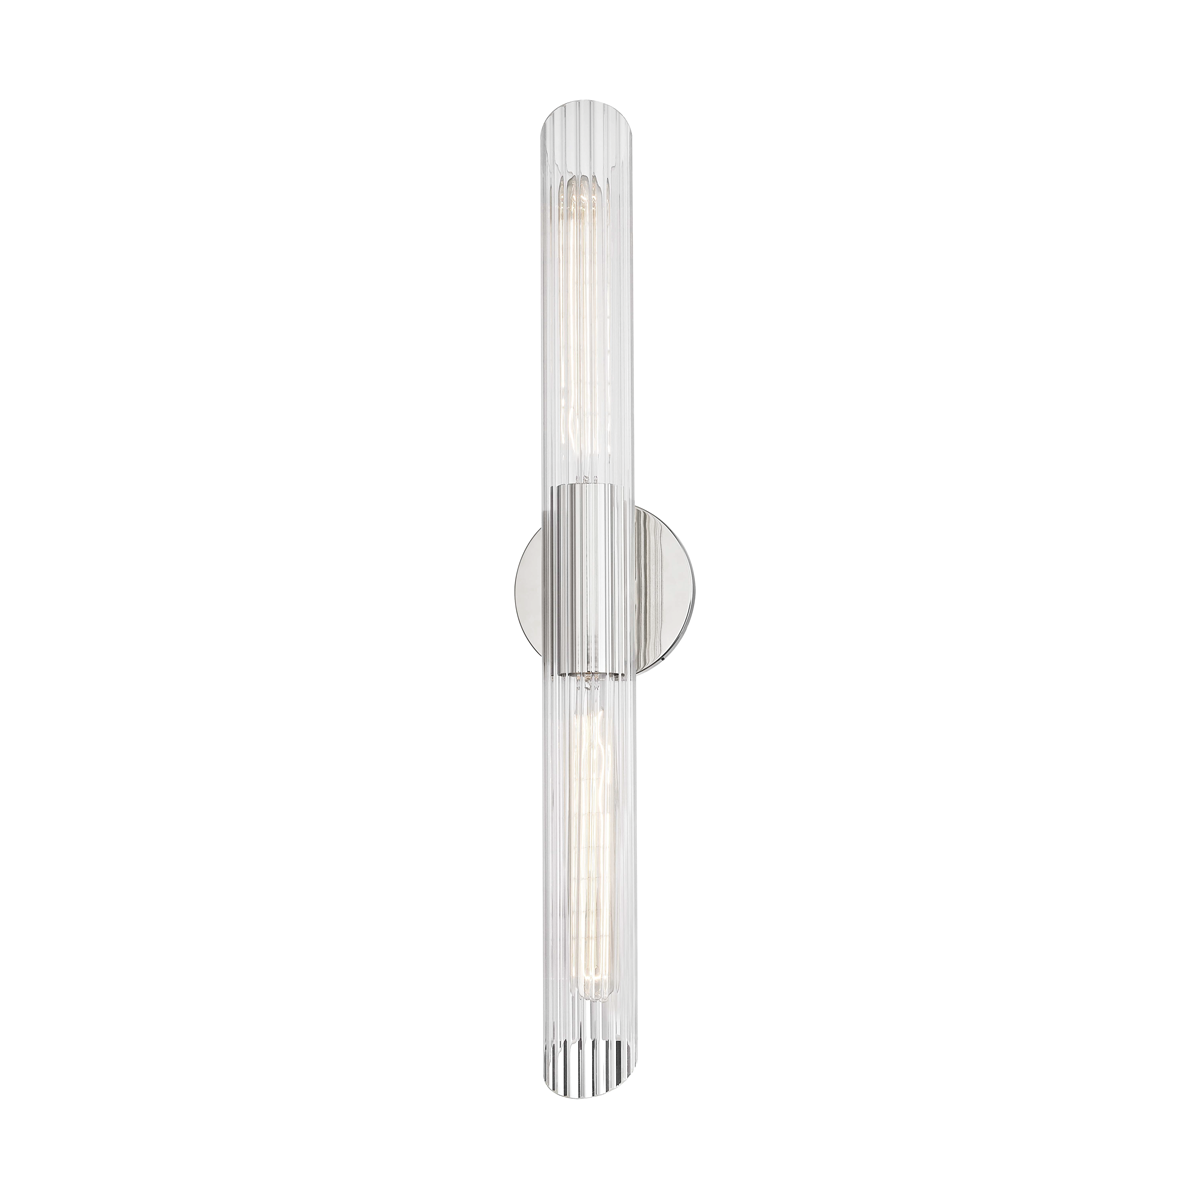 Hudson Valley Lighting Cecily Large Wall Sconce with Lined Glass and Steel Fitting